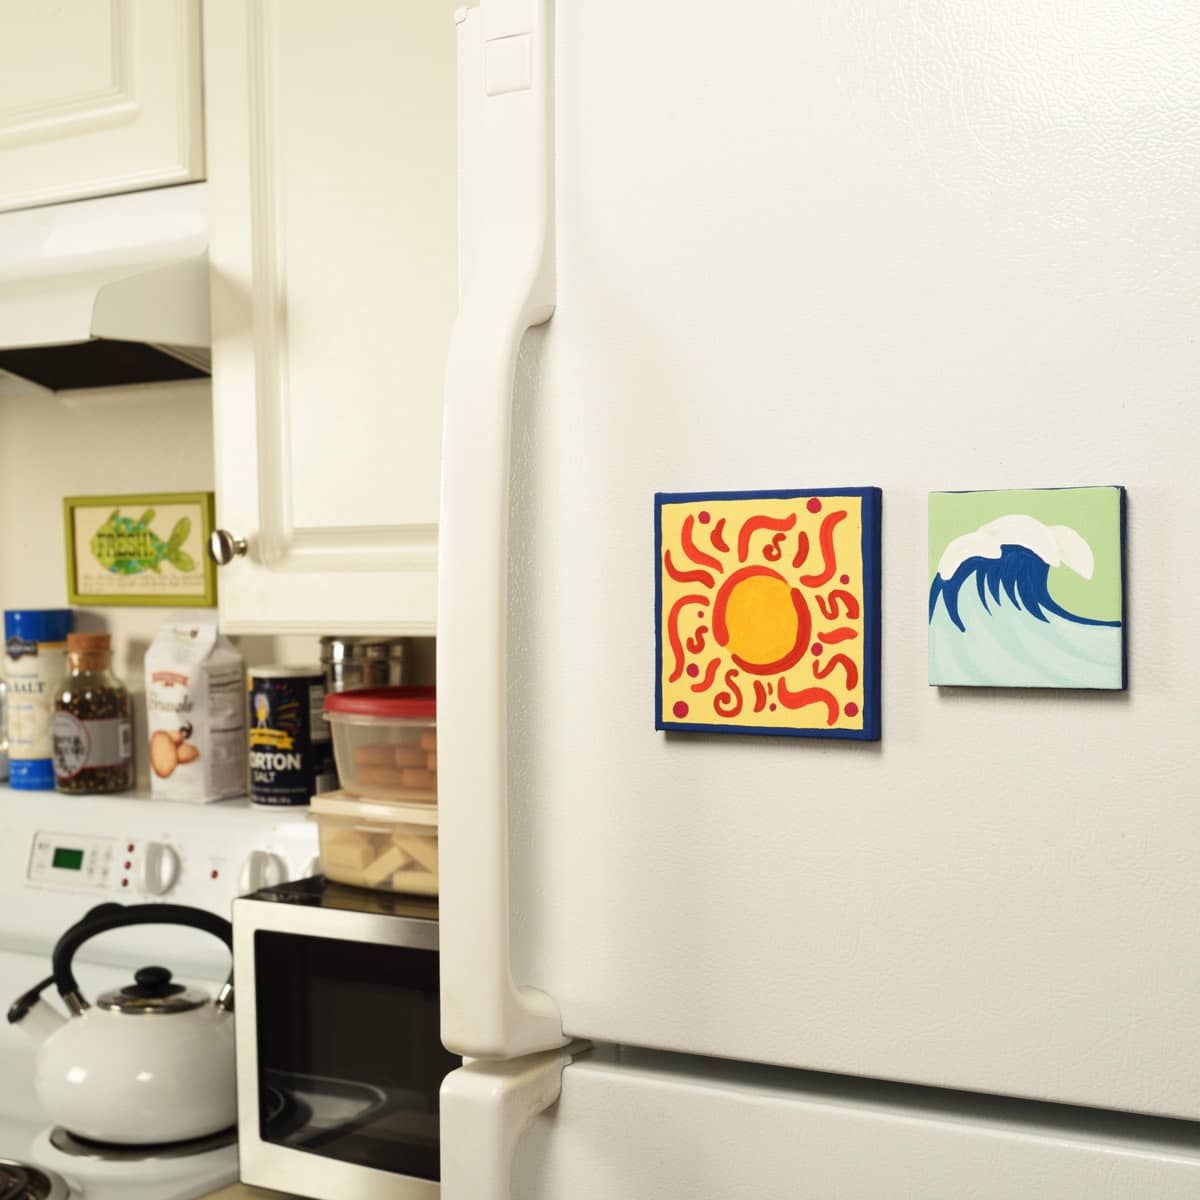 Mini Magnetic 4x4 Canvas Paintable Squares, Pack of 4